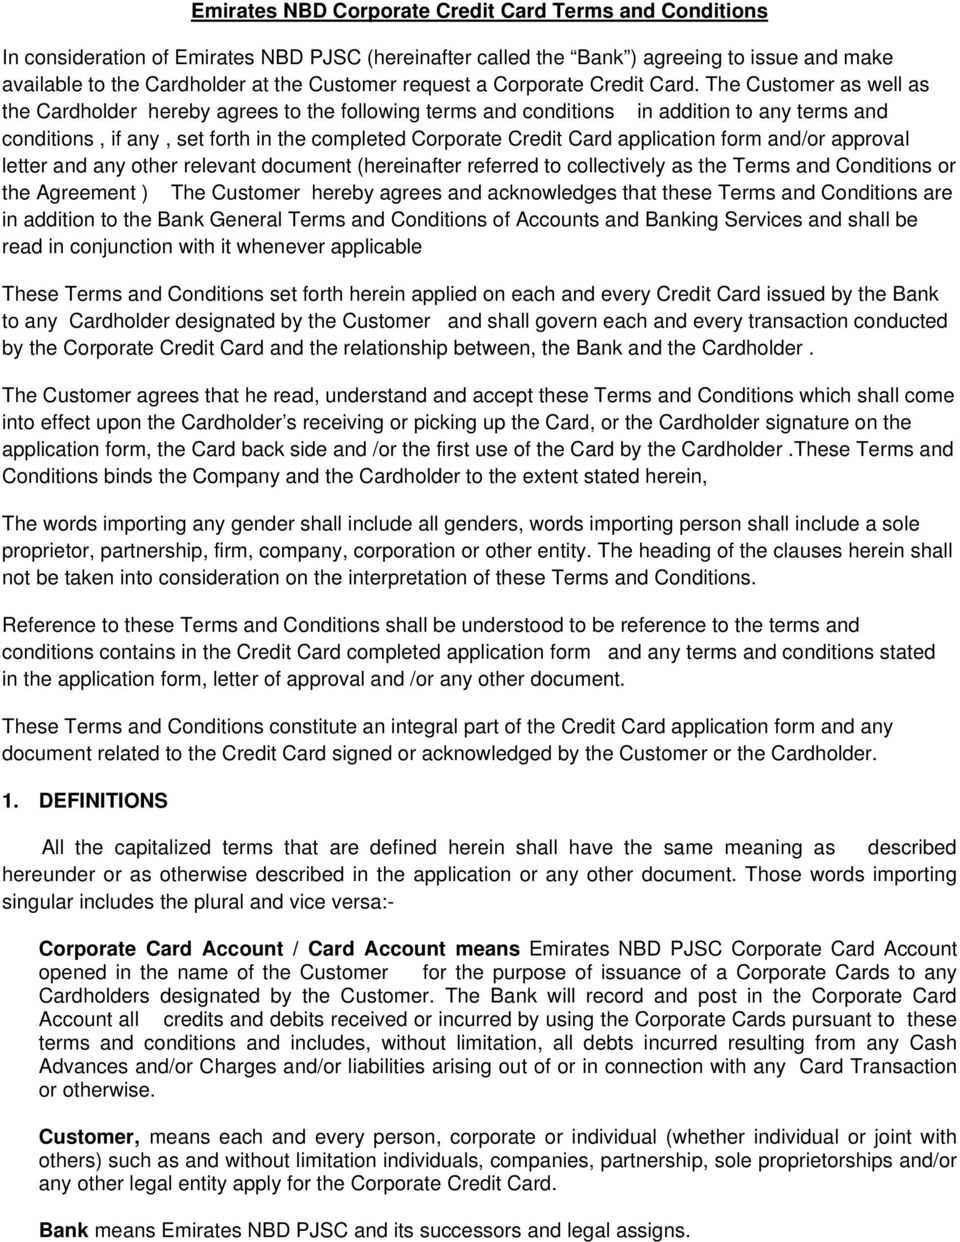 Emirates Nbd Corporate Credit Card Terms And Conditions Inside Corporate Credit Card Agreement Template